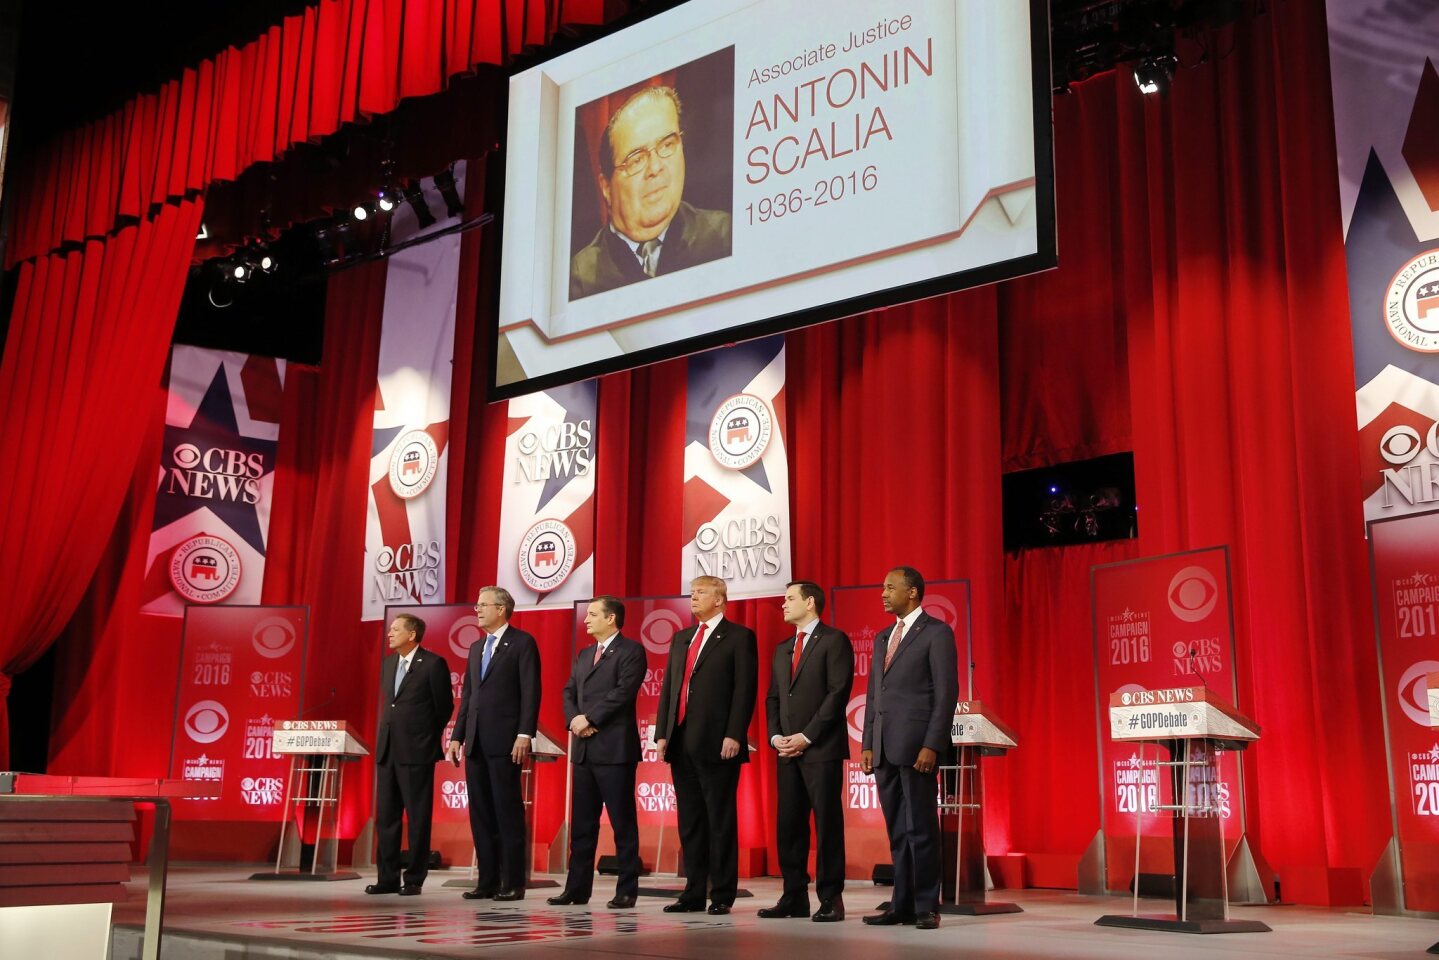 John Kasich, Jeb Bush, Ted Cruz, Donald Trump, Marco Rubio and Ben Carson take the stage beneath an image of U.S. Supreme Court Justice Antonin Scalia, who died earlier in the day.